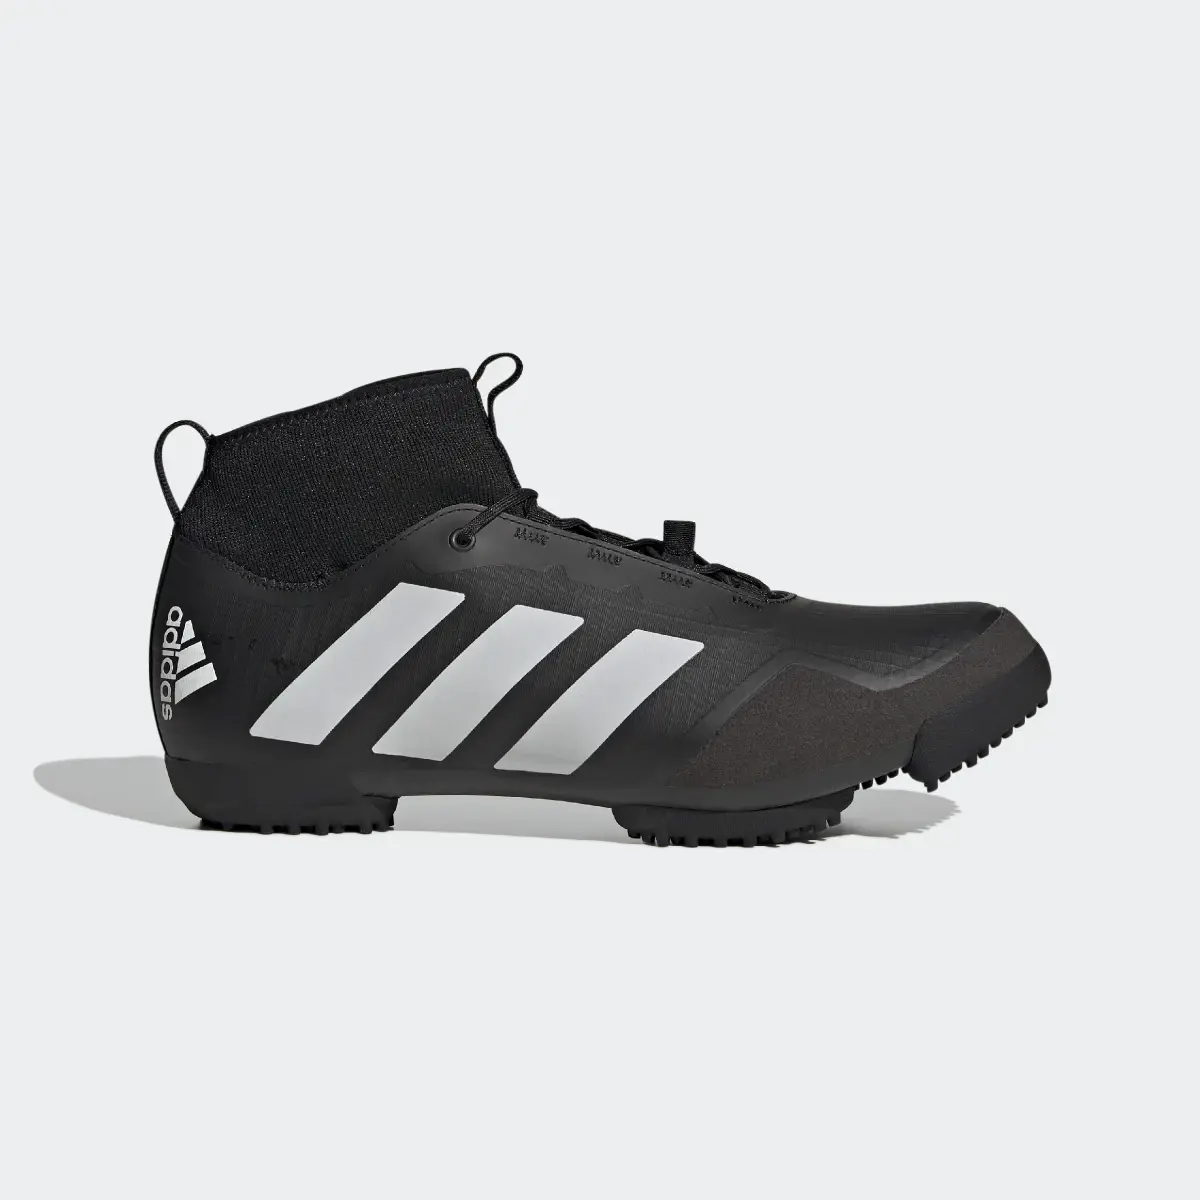 Adidas The Gravel Cycling Shoes. 2